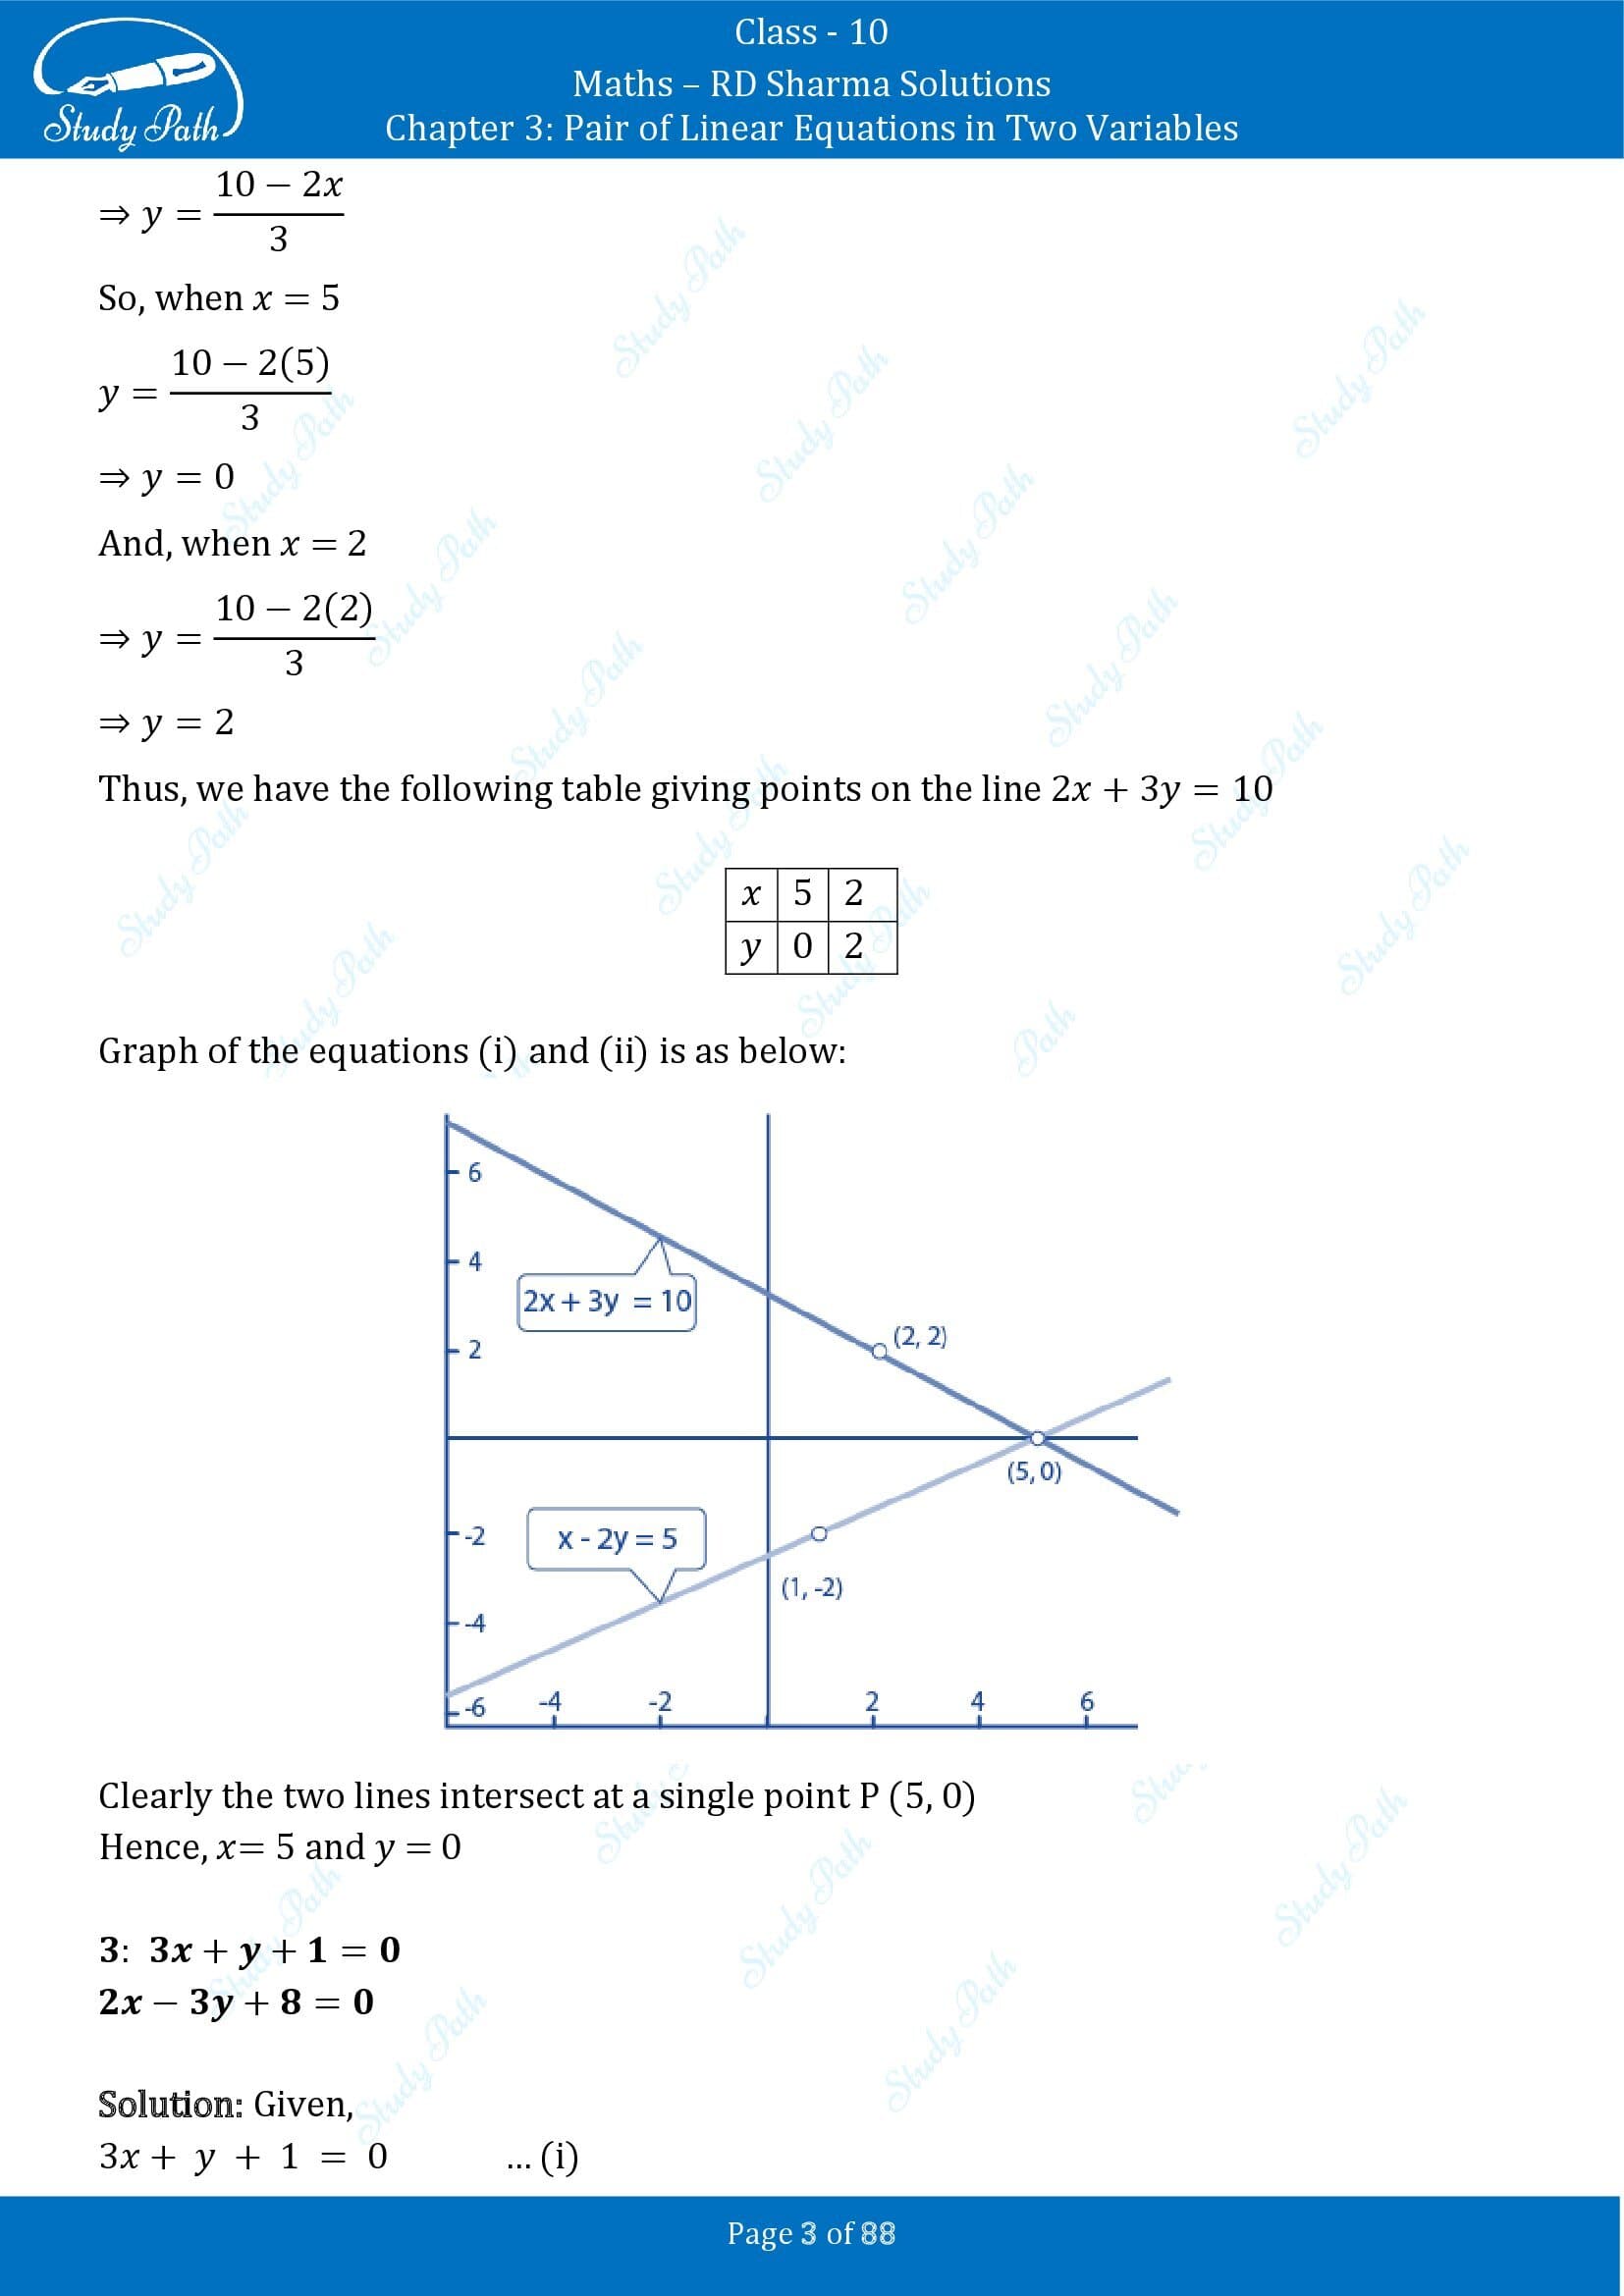 RD Sharma Solutions Class 10 Chapter 3 Pair of Linear Equations in Two Variables Exercise 3.2 00003